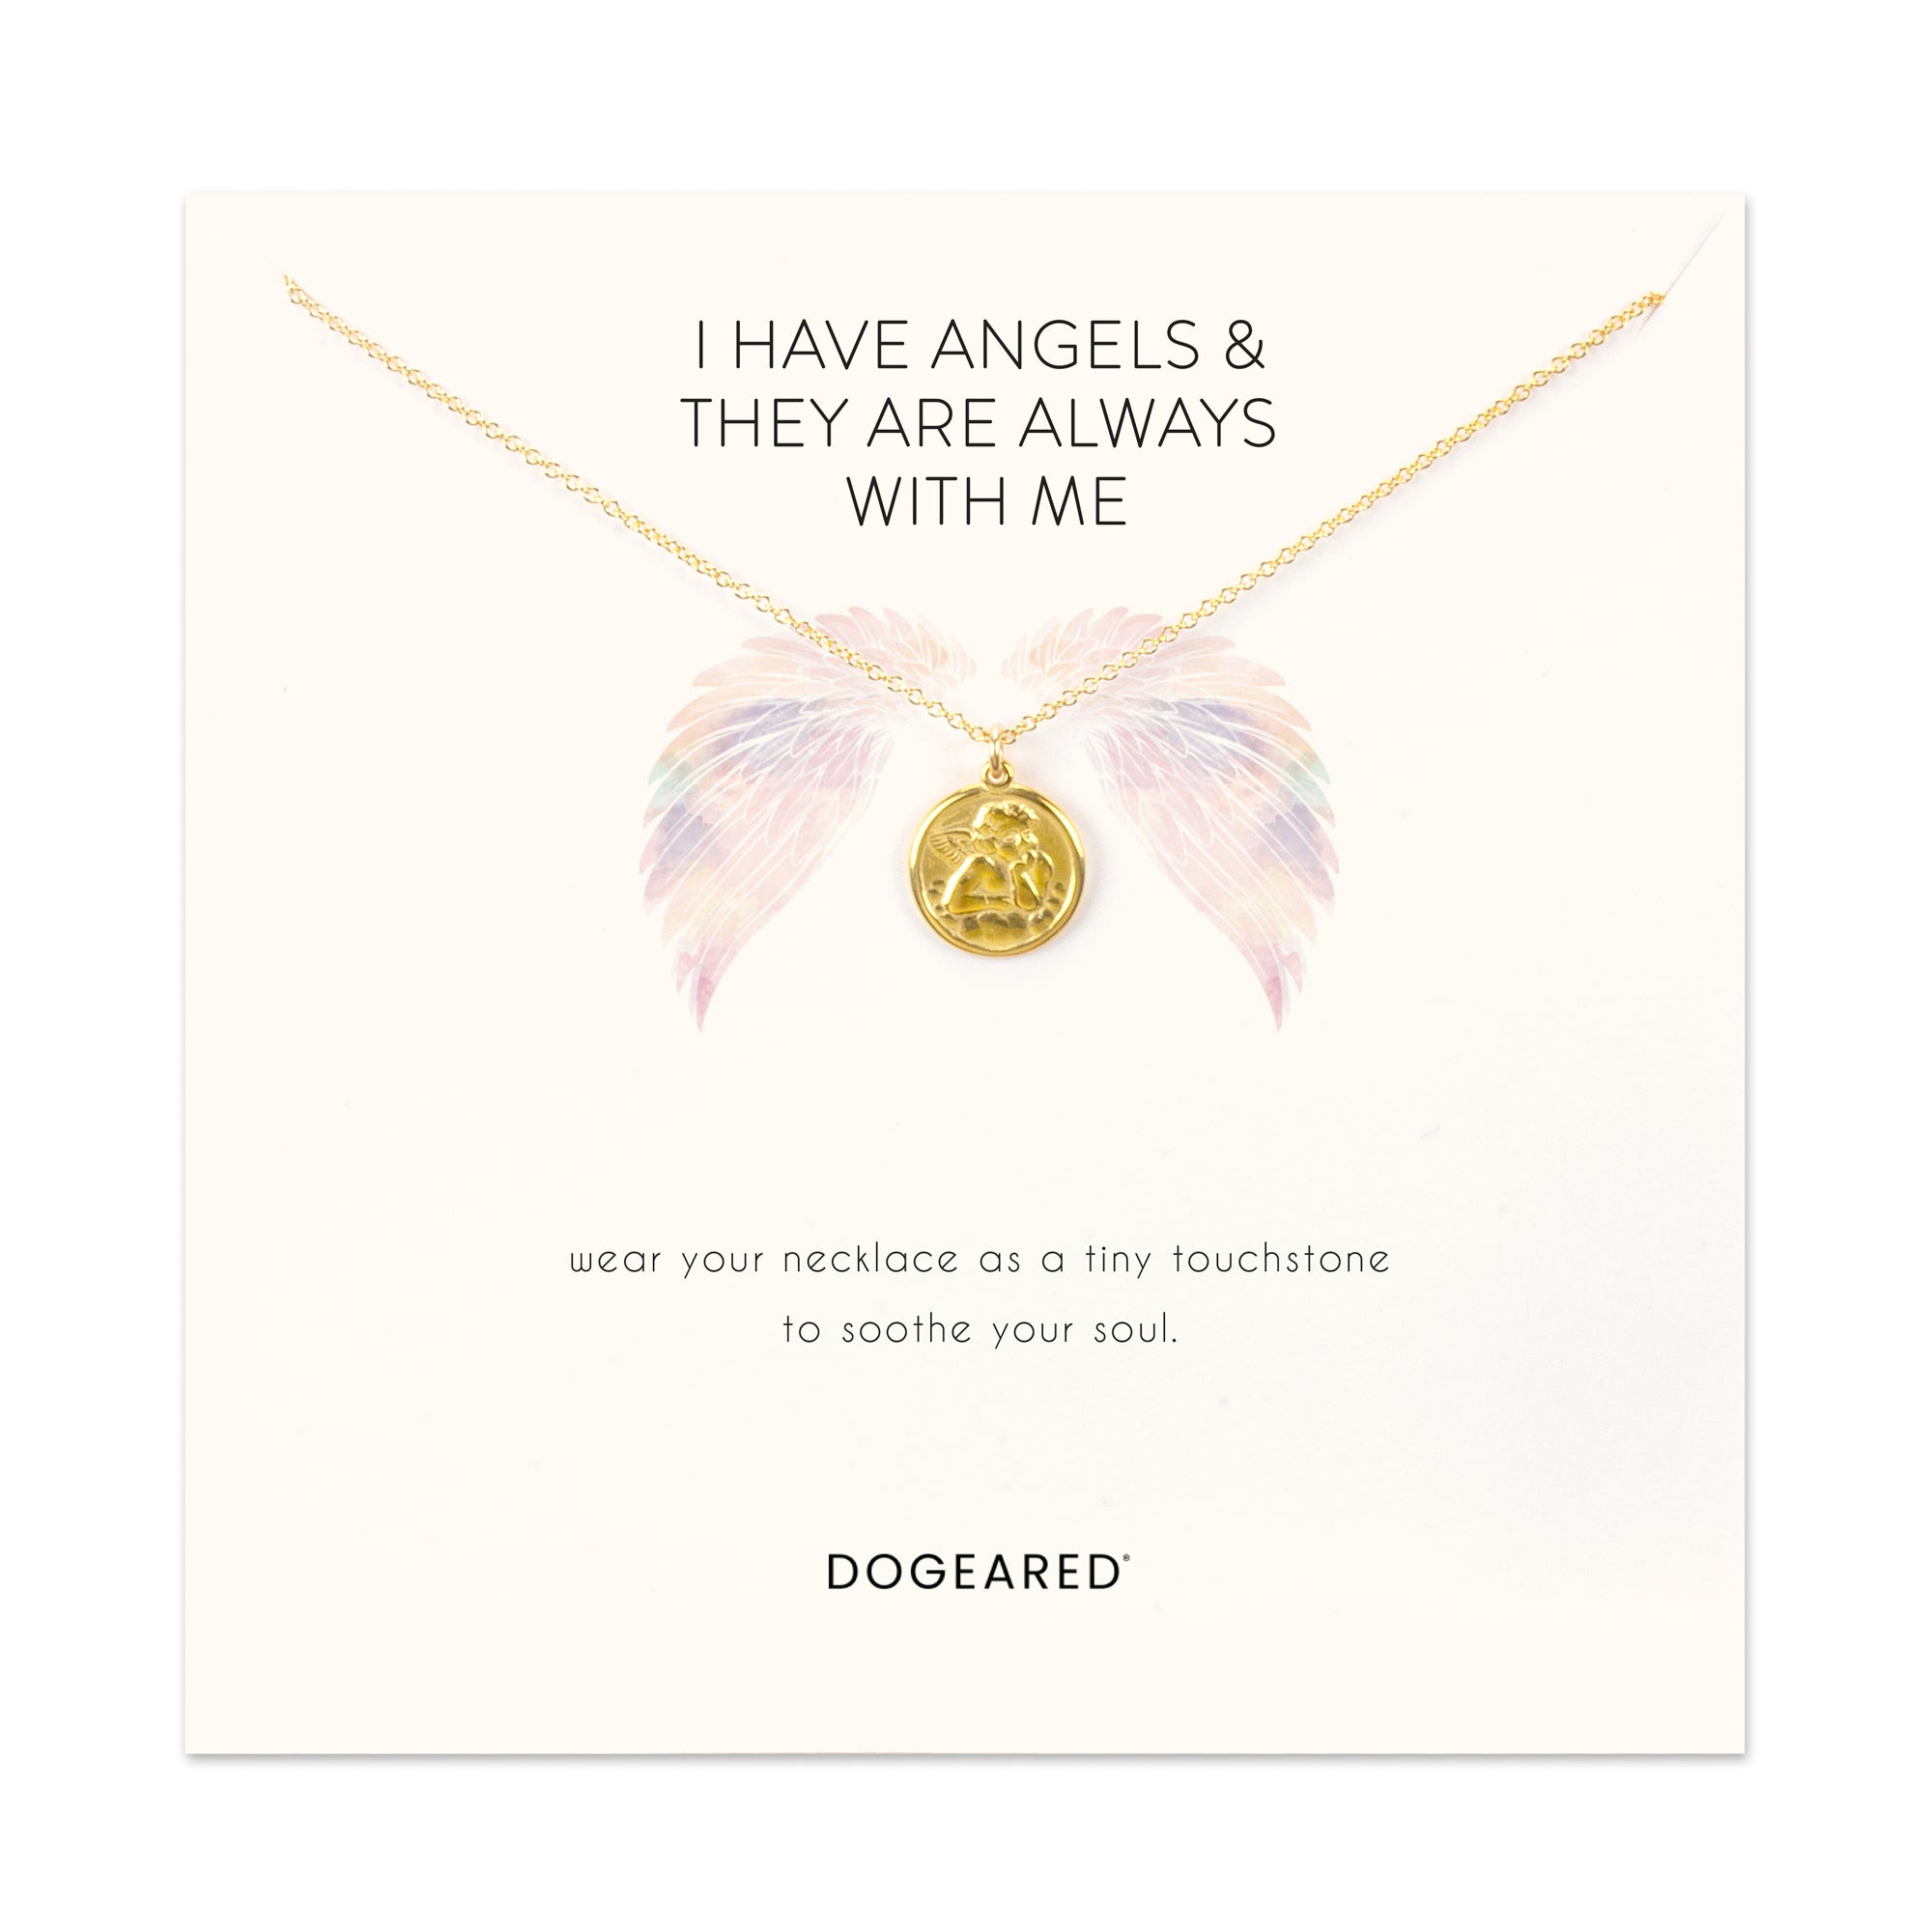 I have angels mini angel coin necklace - Dogeared